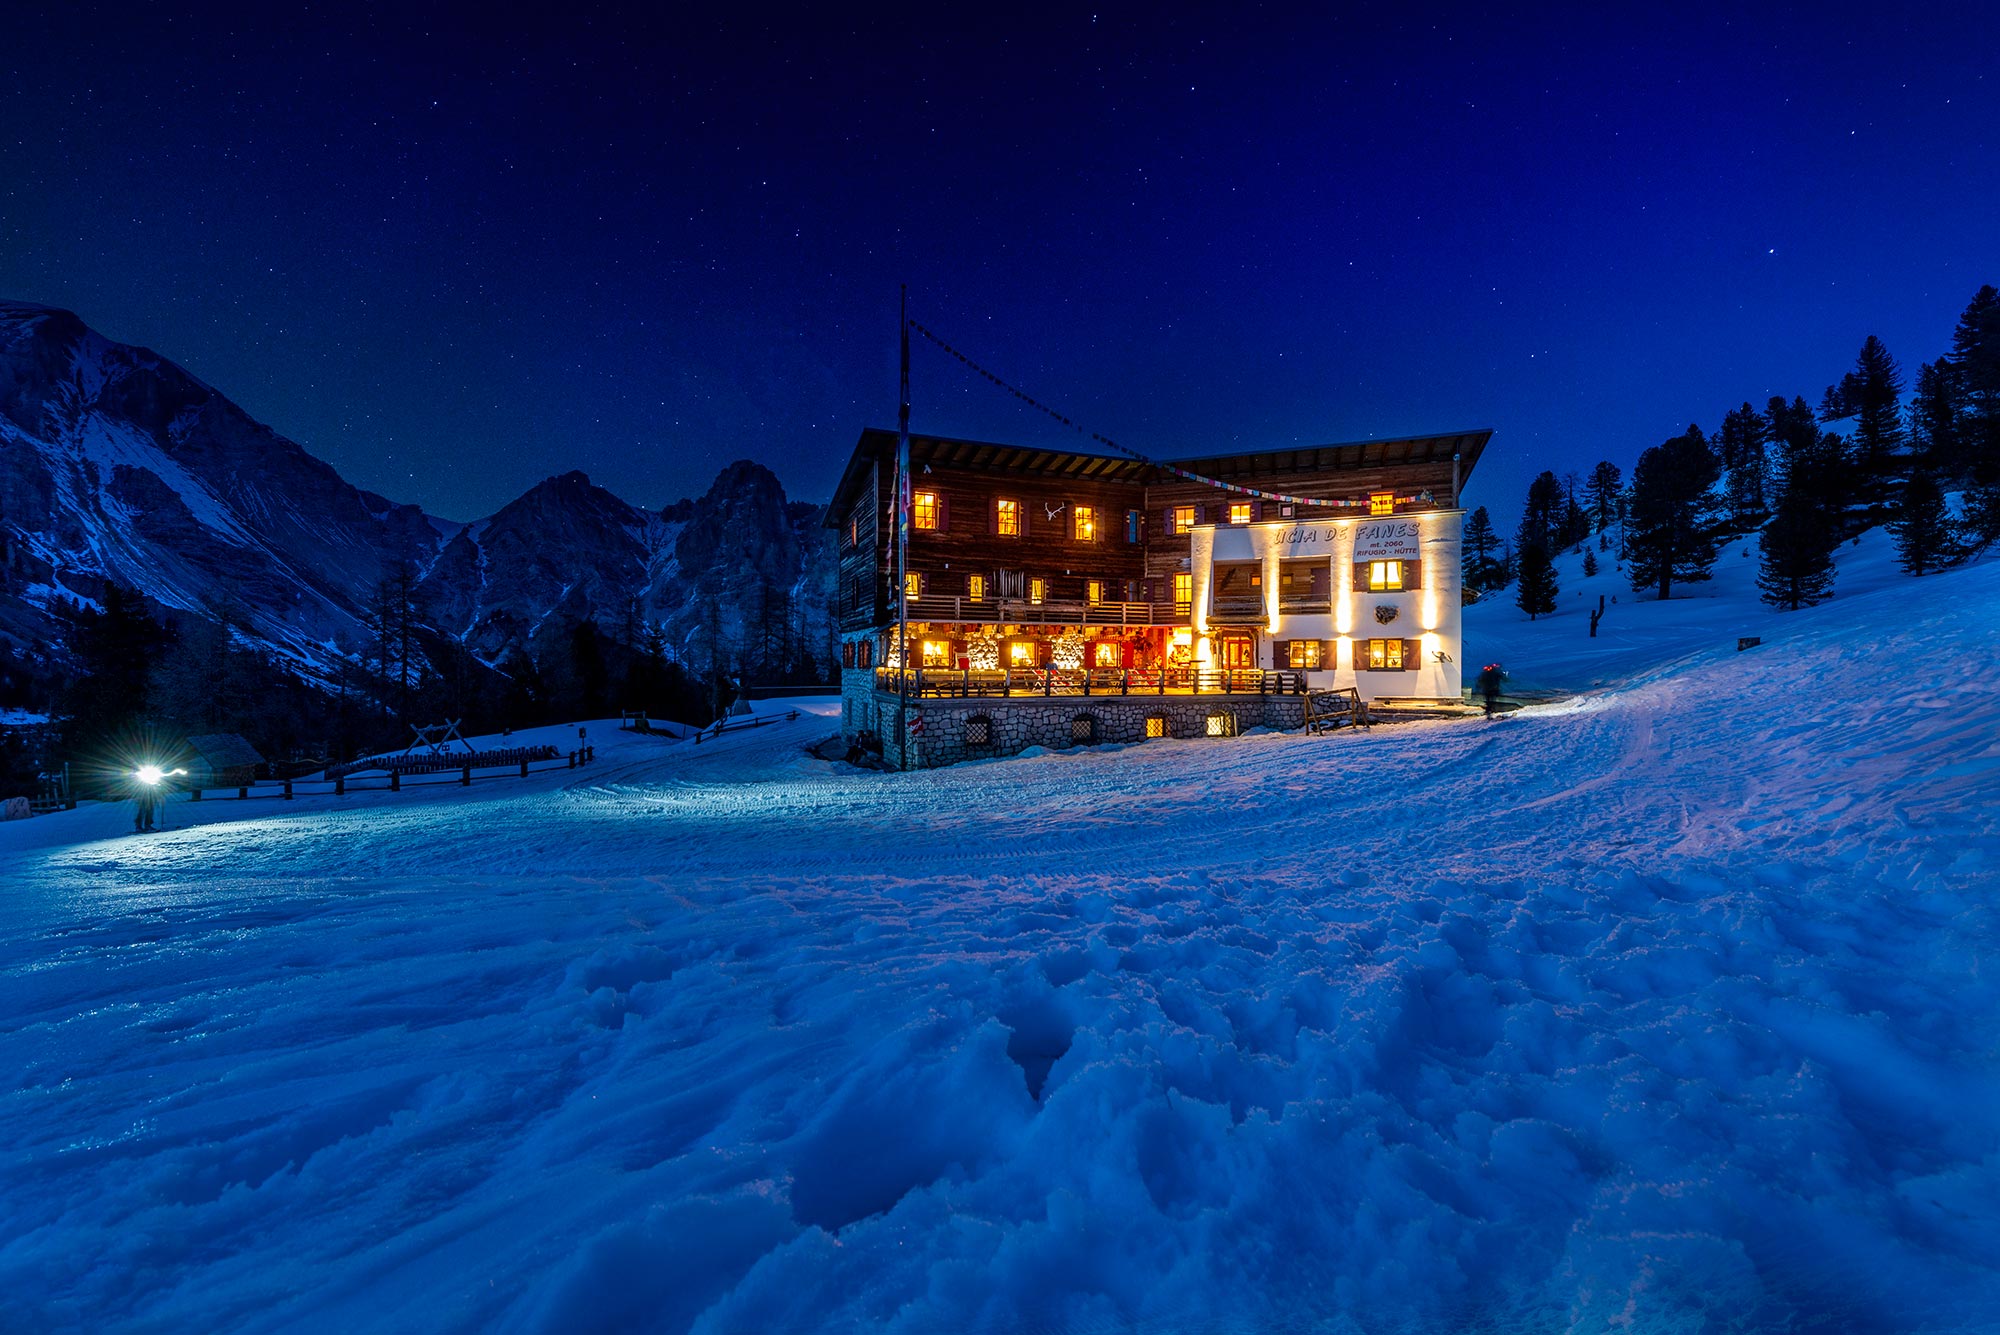 The facade of the Fanes Hut at night during the winter